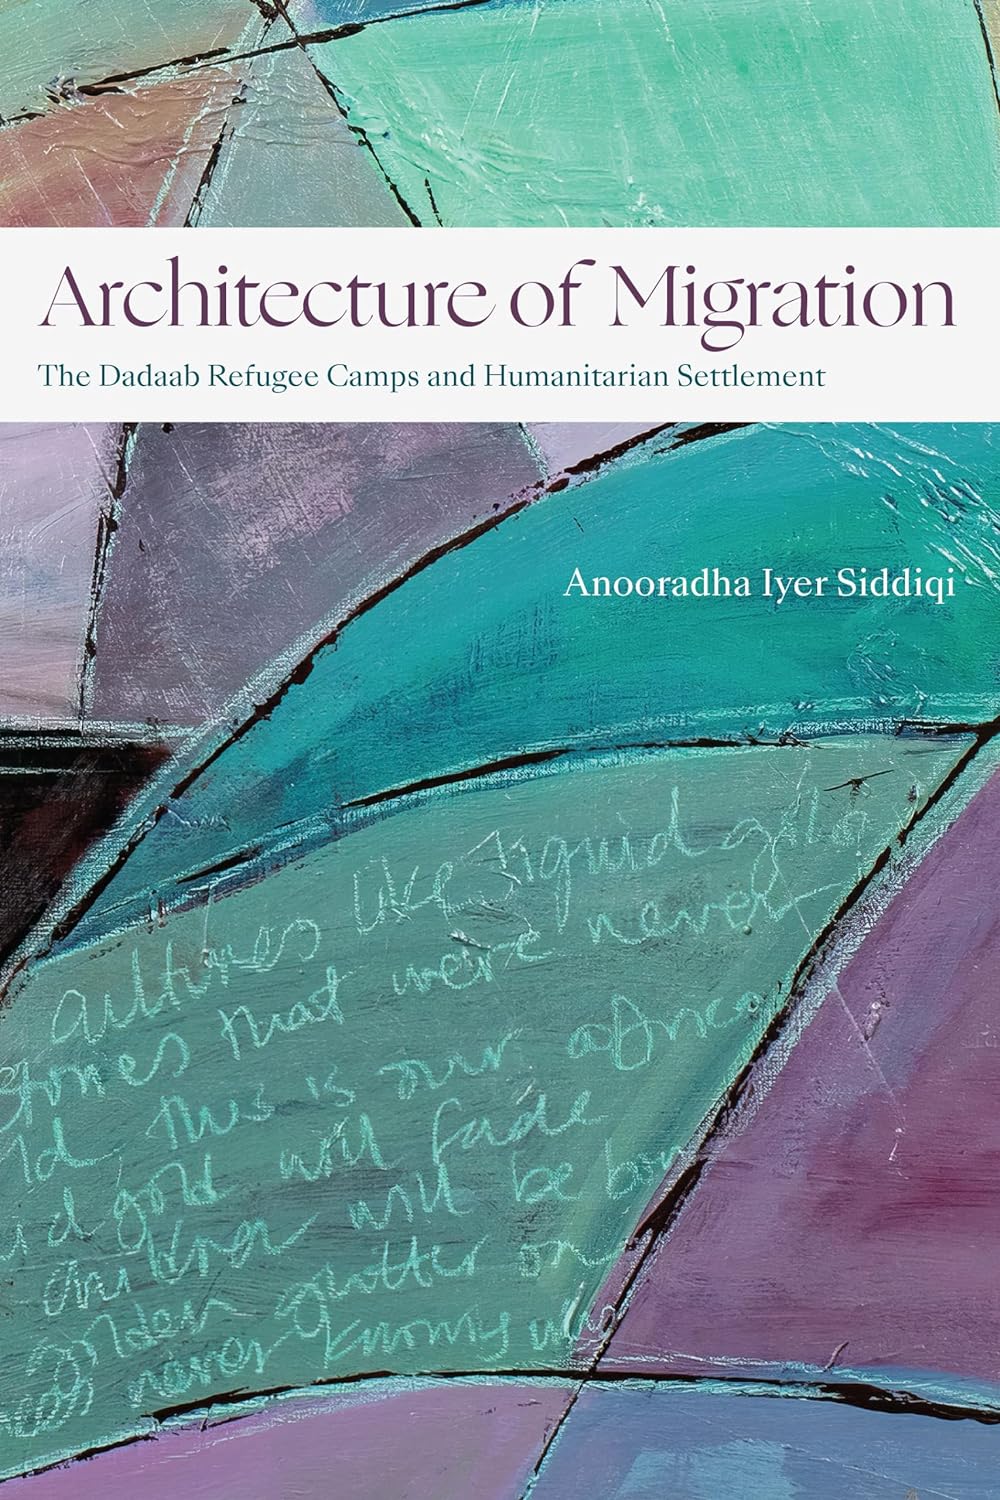 Architecture of Migration: The Dadaab Refugee Camps and Humanitarian Settlement by Anooradha Iyer Siddiqi